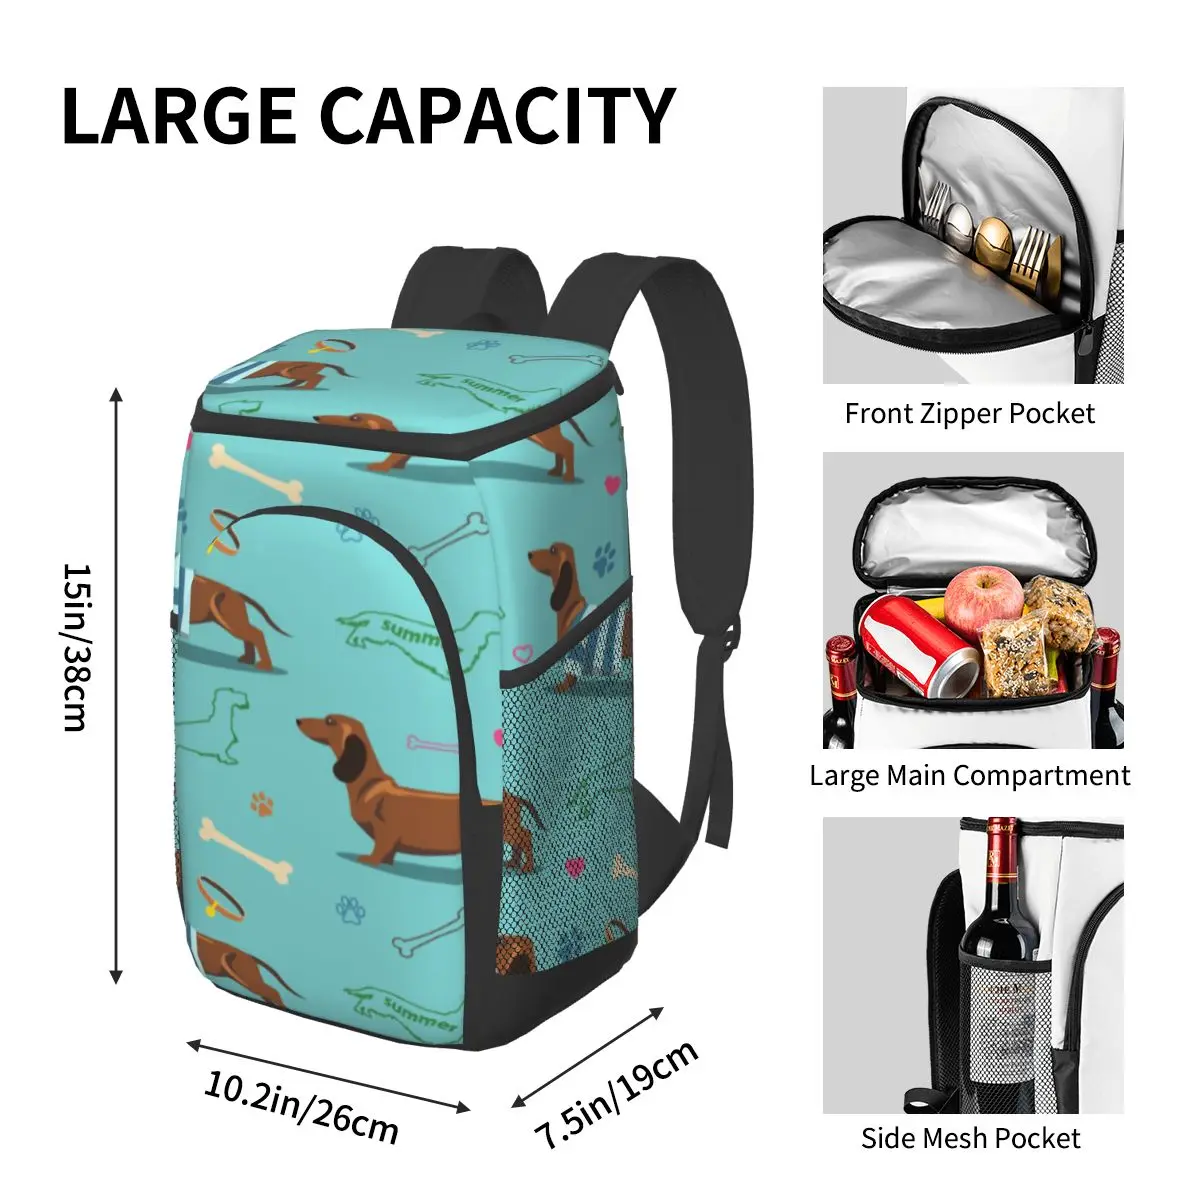 protable insulated thermal cooler waterproof lunch bag dachshund dogs and bones picnic camping backpack double shoulder wine bag free global shipping